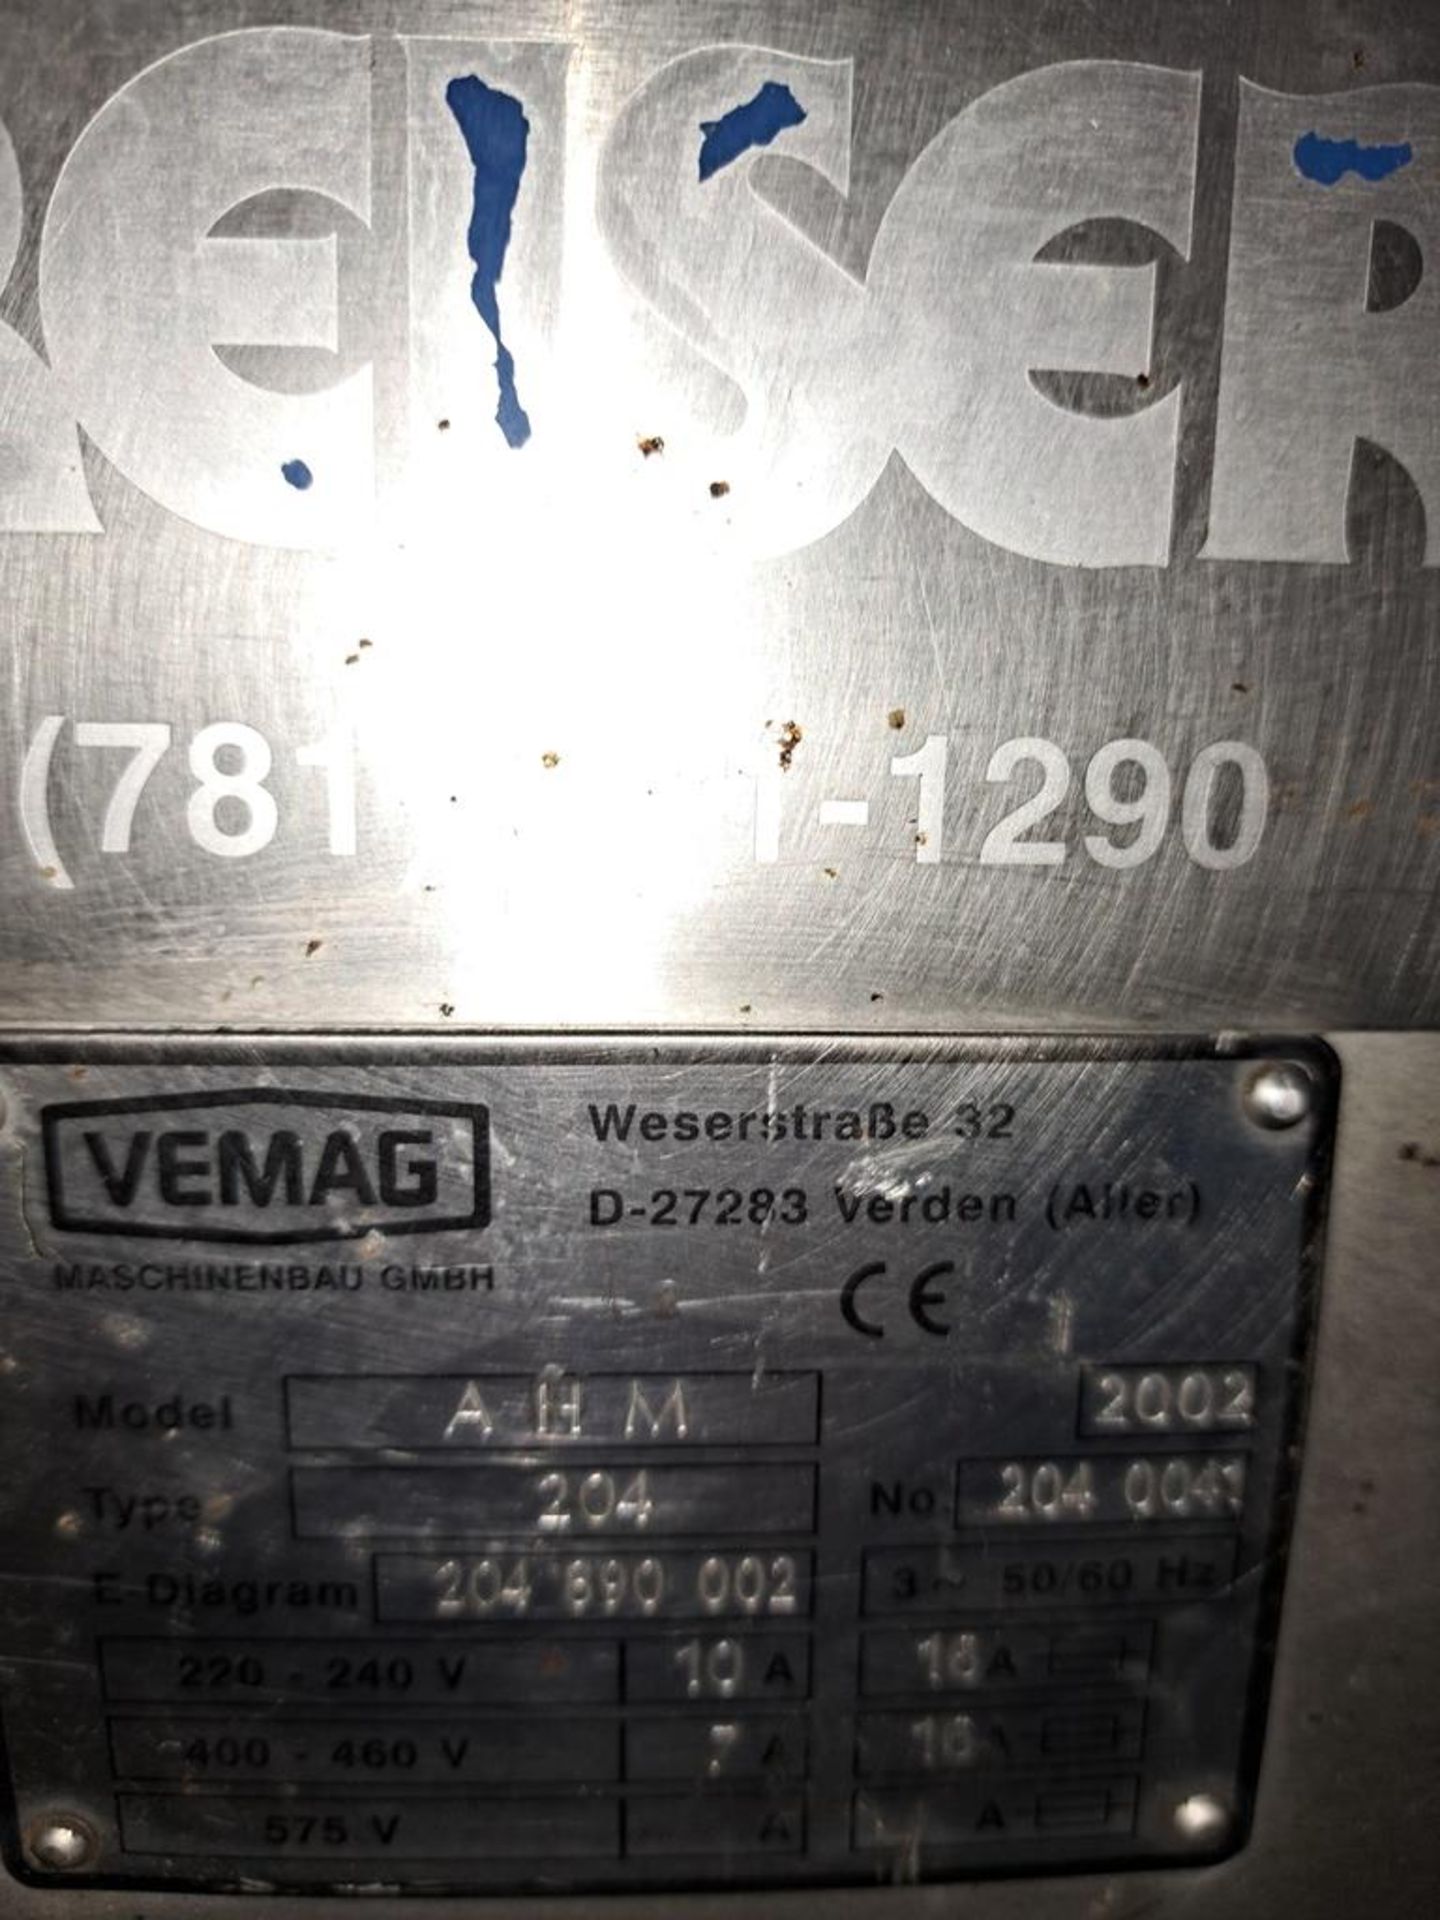 Vemag Mdl. AHM204 Sausage Link Hanger, 220-460 volts, 3 phase, Ser. #2040041 (Located in Plano, IL) - Image 5 of 5